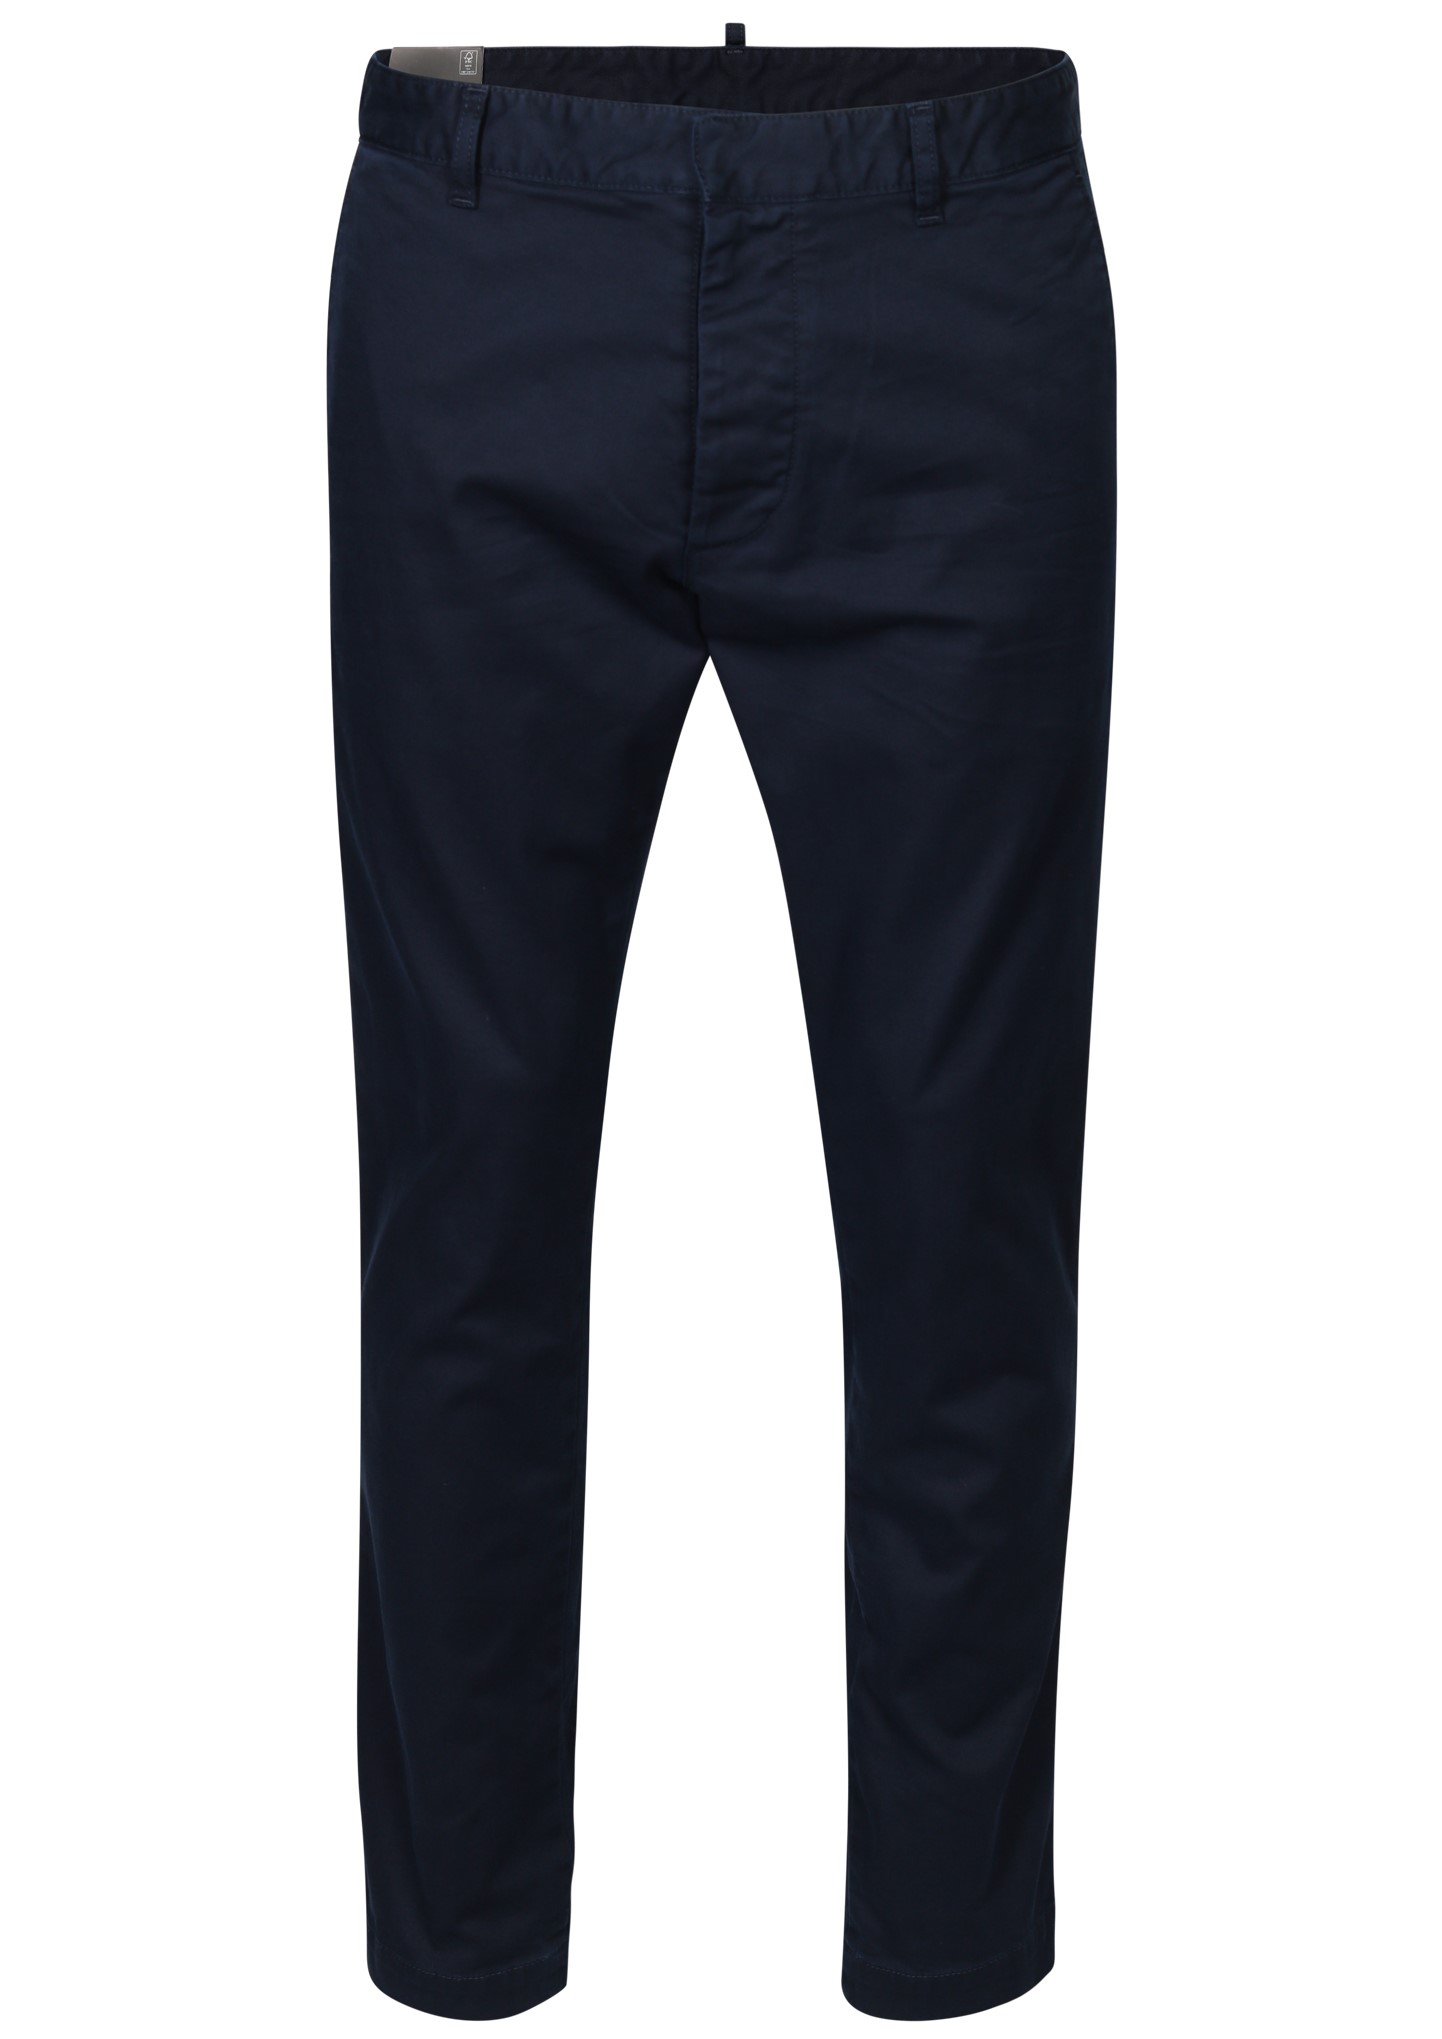 DSQUARED2 Chino Pant in Navy